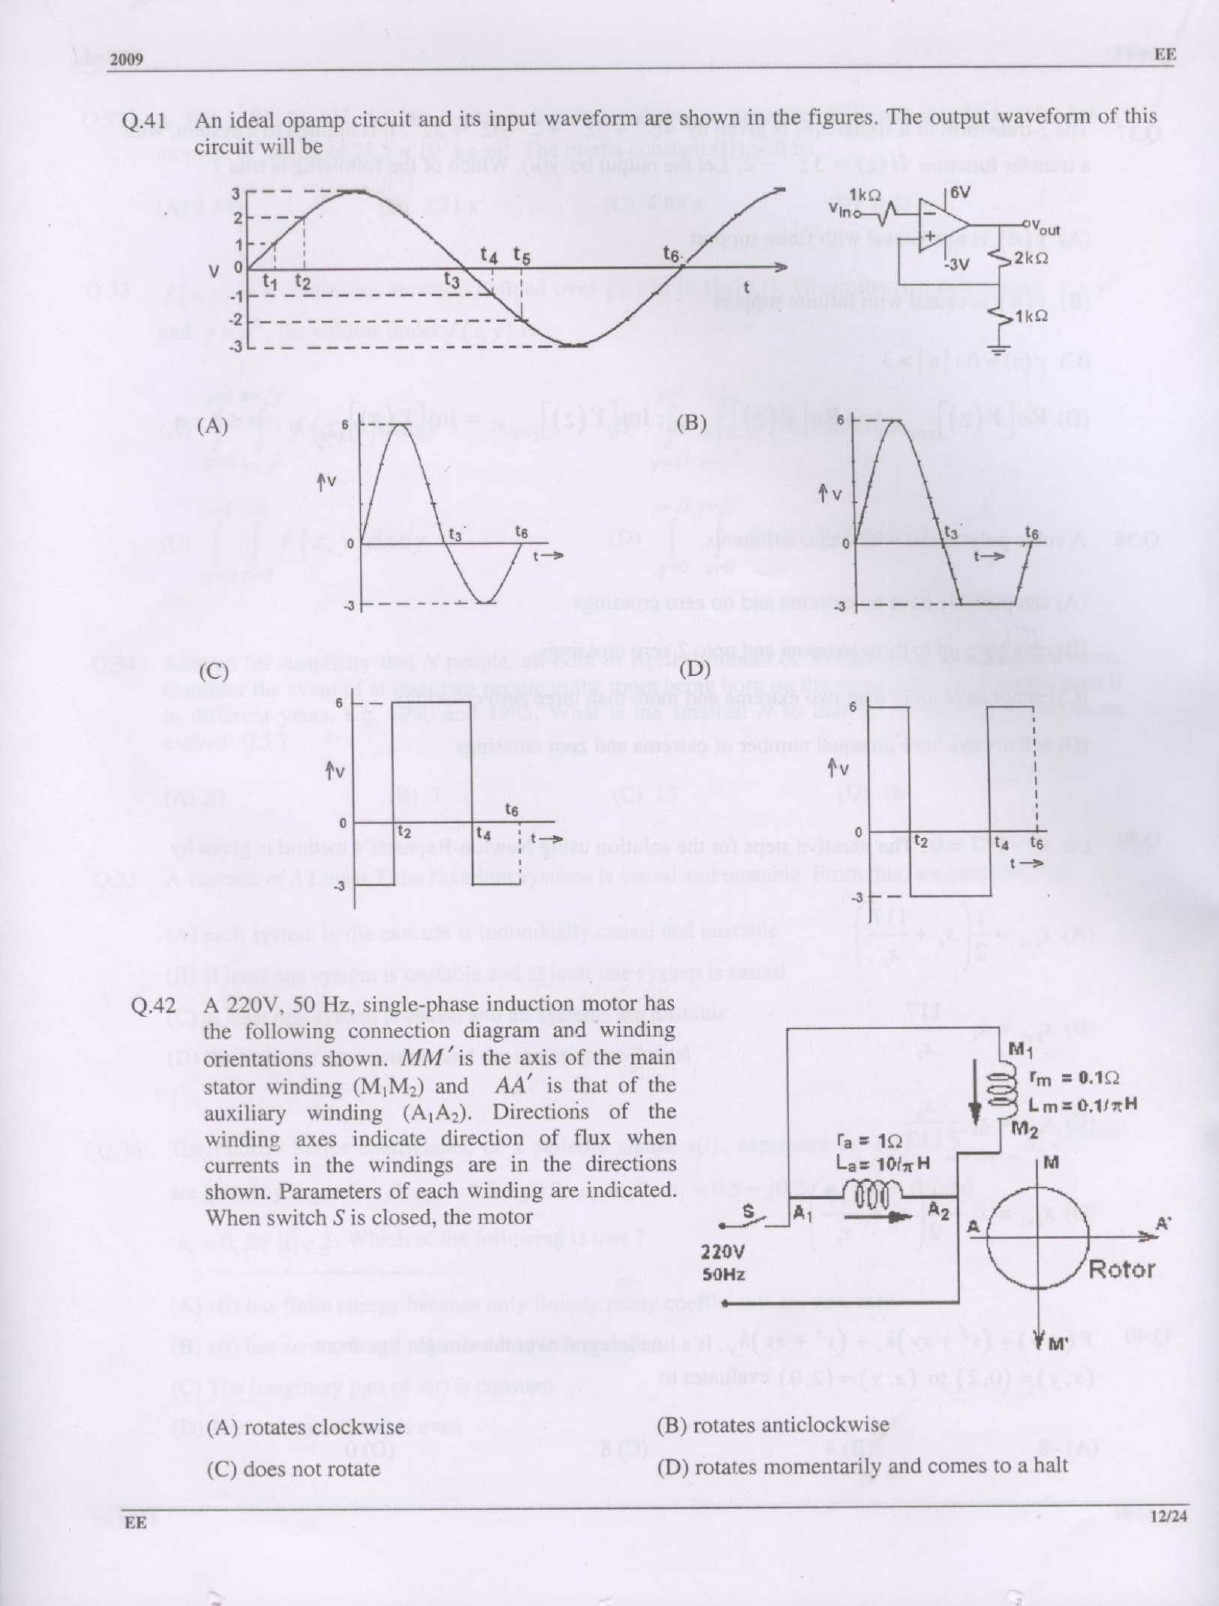 GATE Exam Question Paper 2009 Electrical Engineering 12